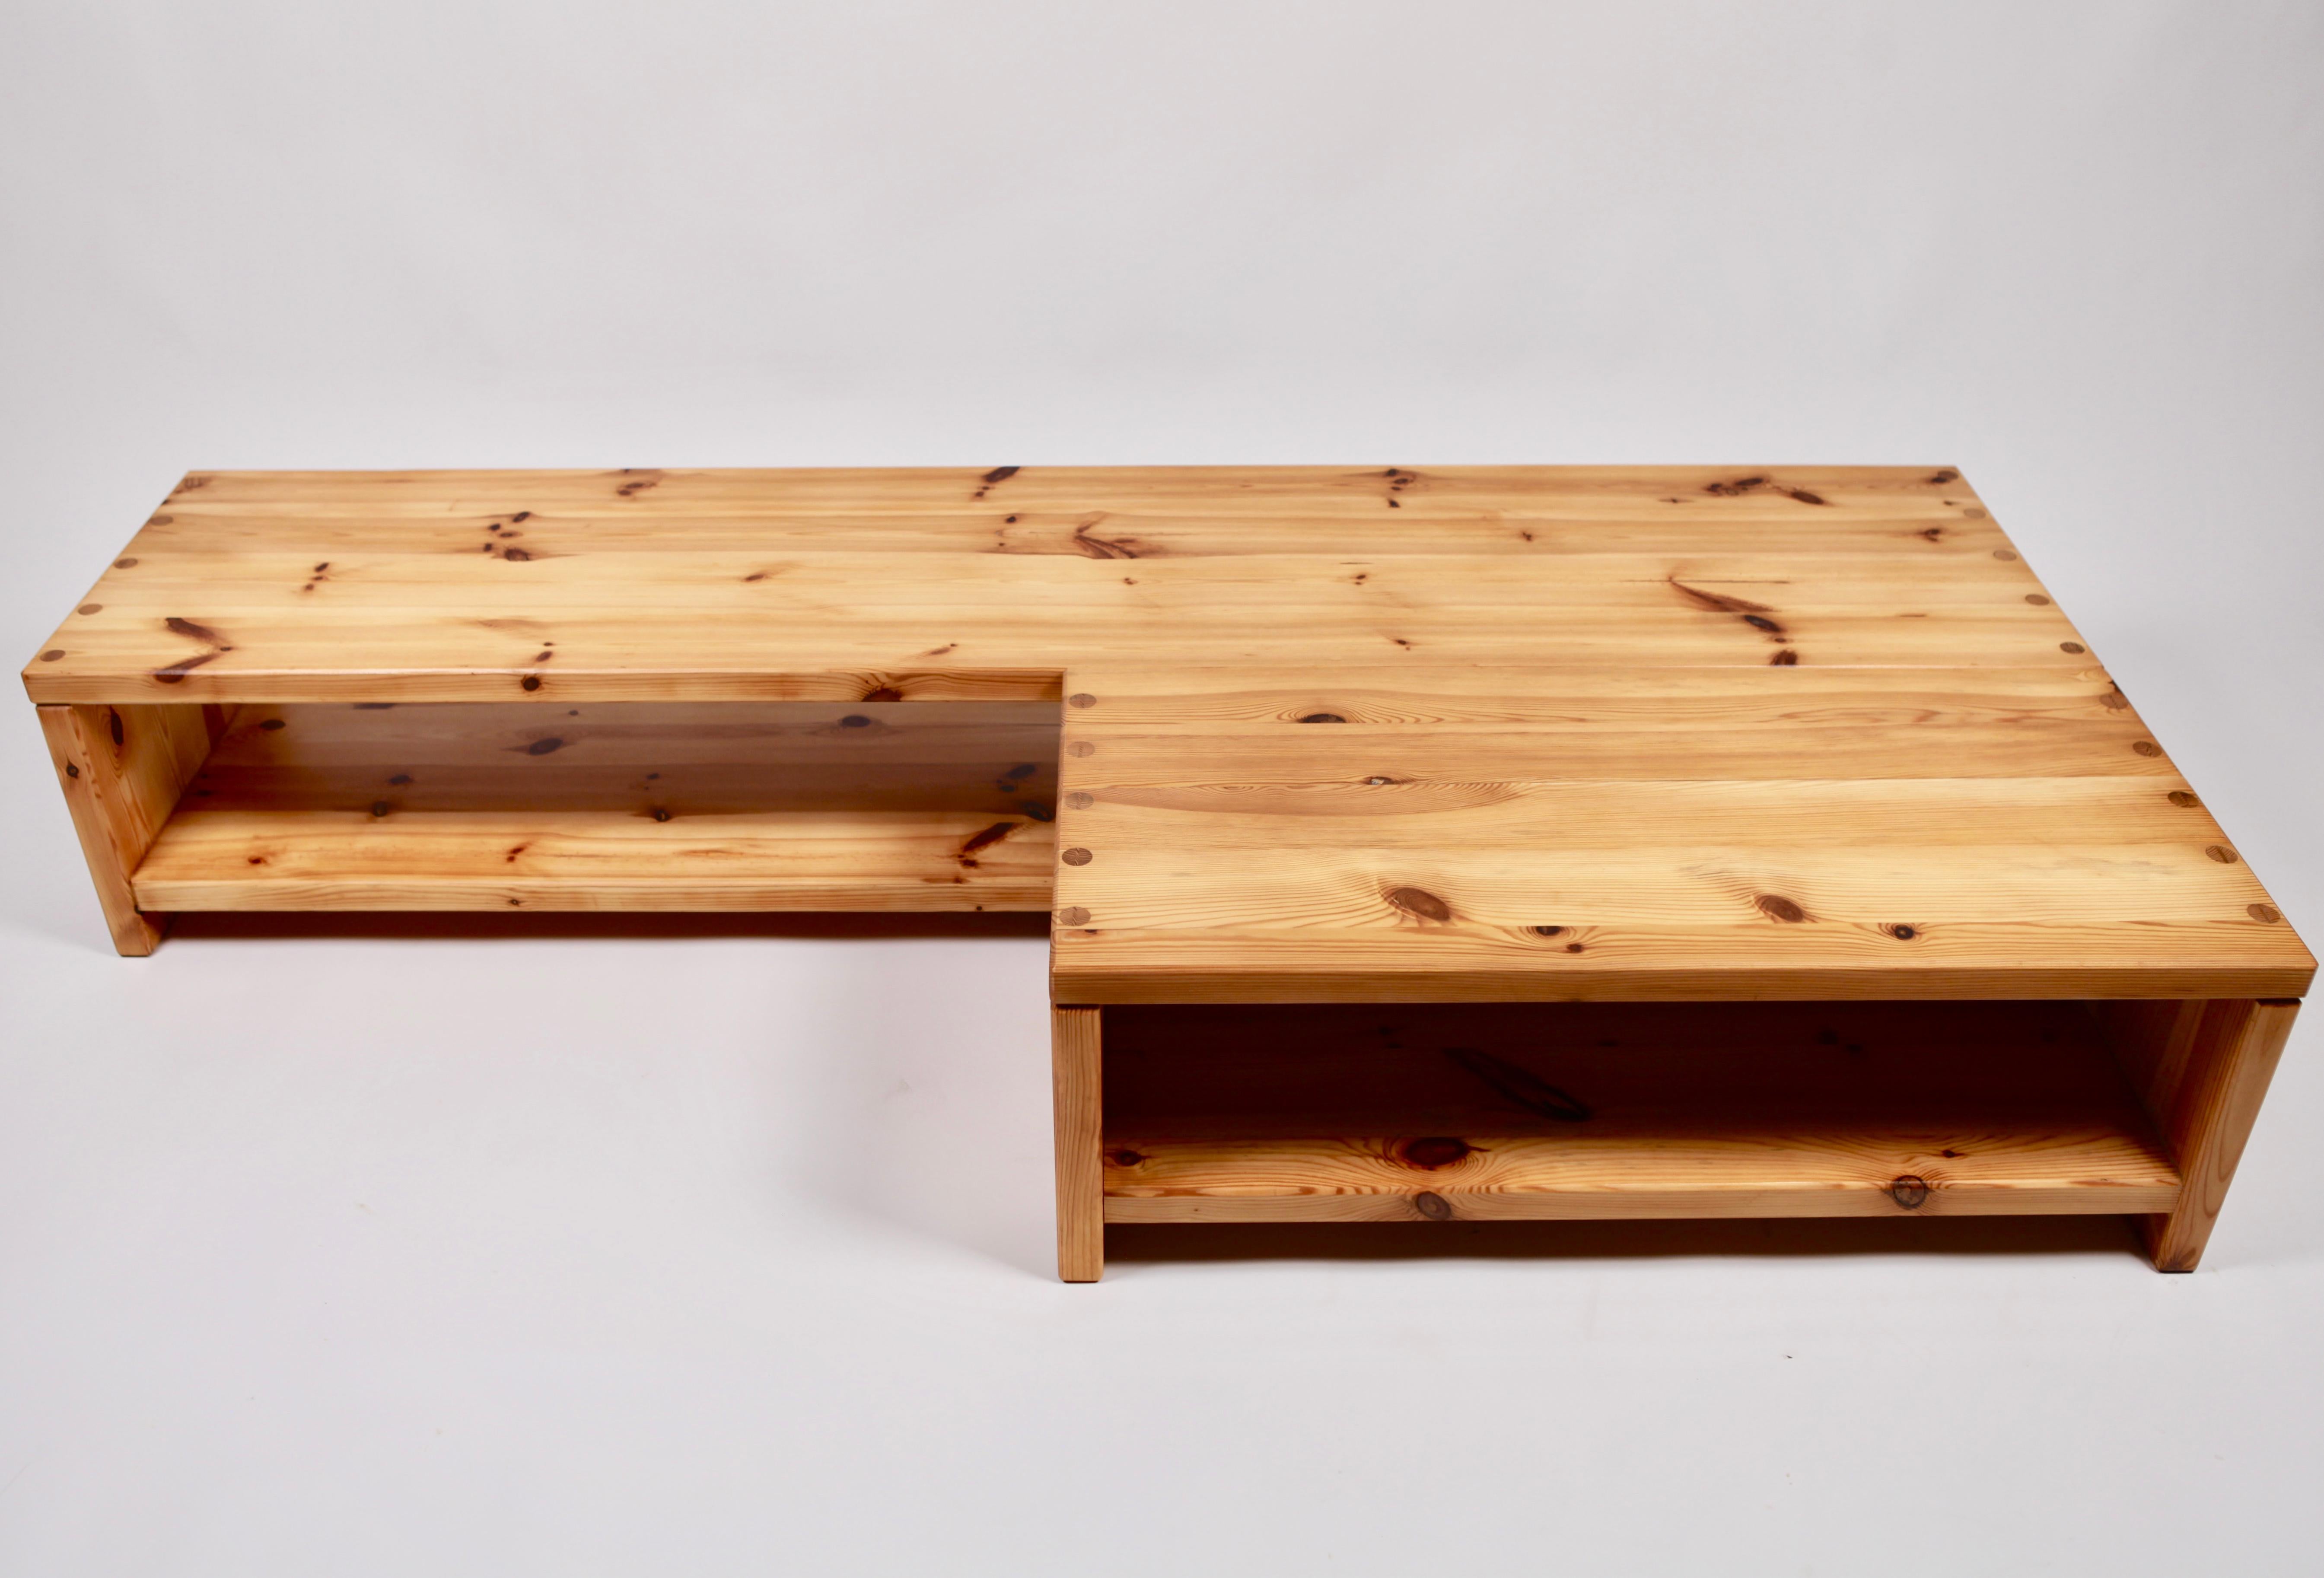 Stained Roland Wilhelmsson, Pair of Coffee Table in Pine, Sweden, 1970s